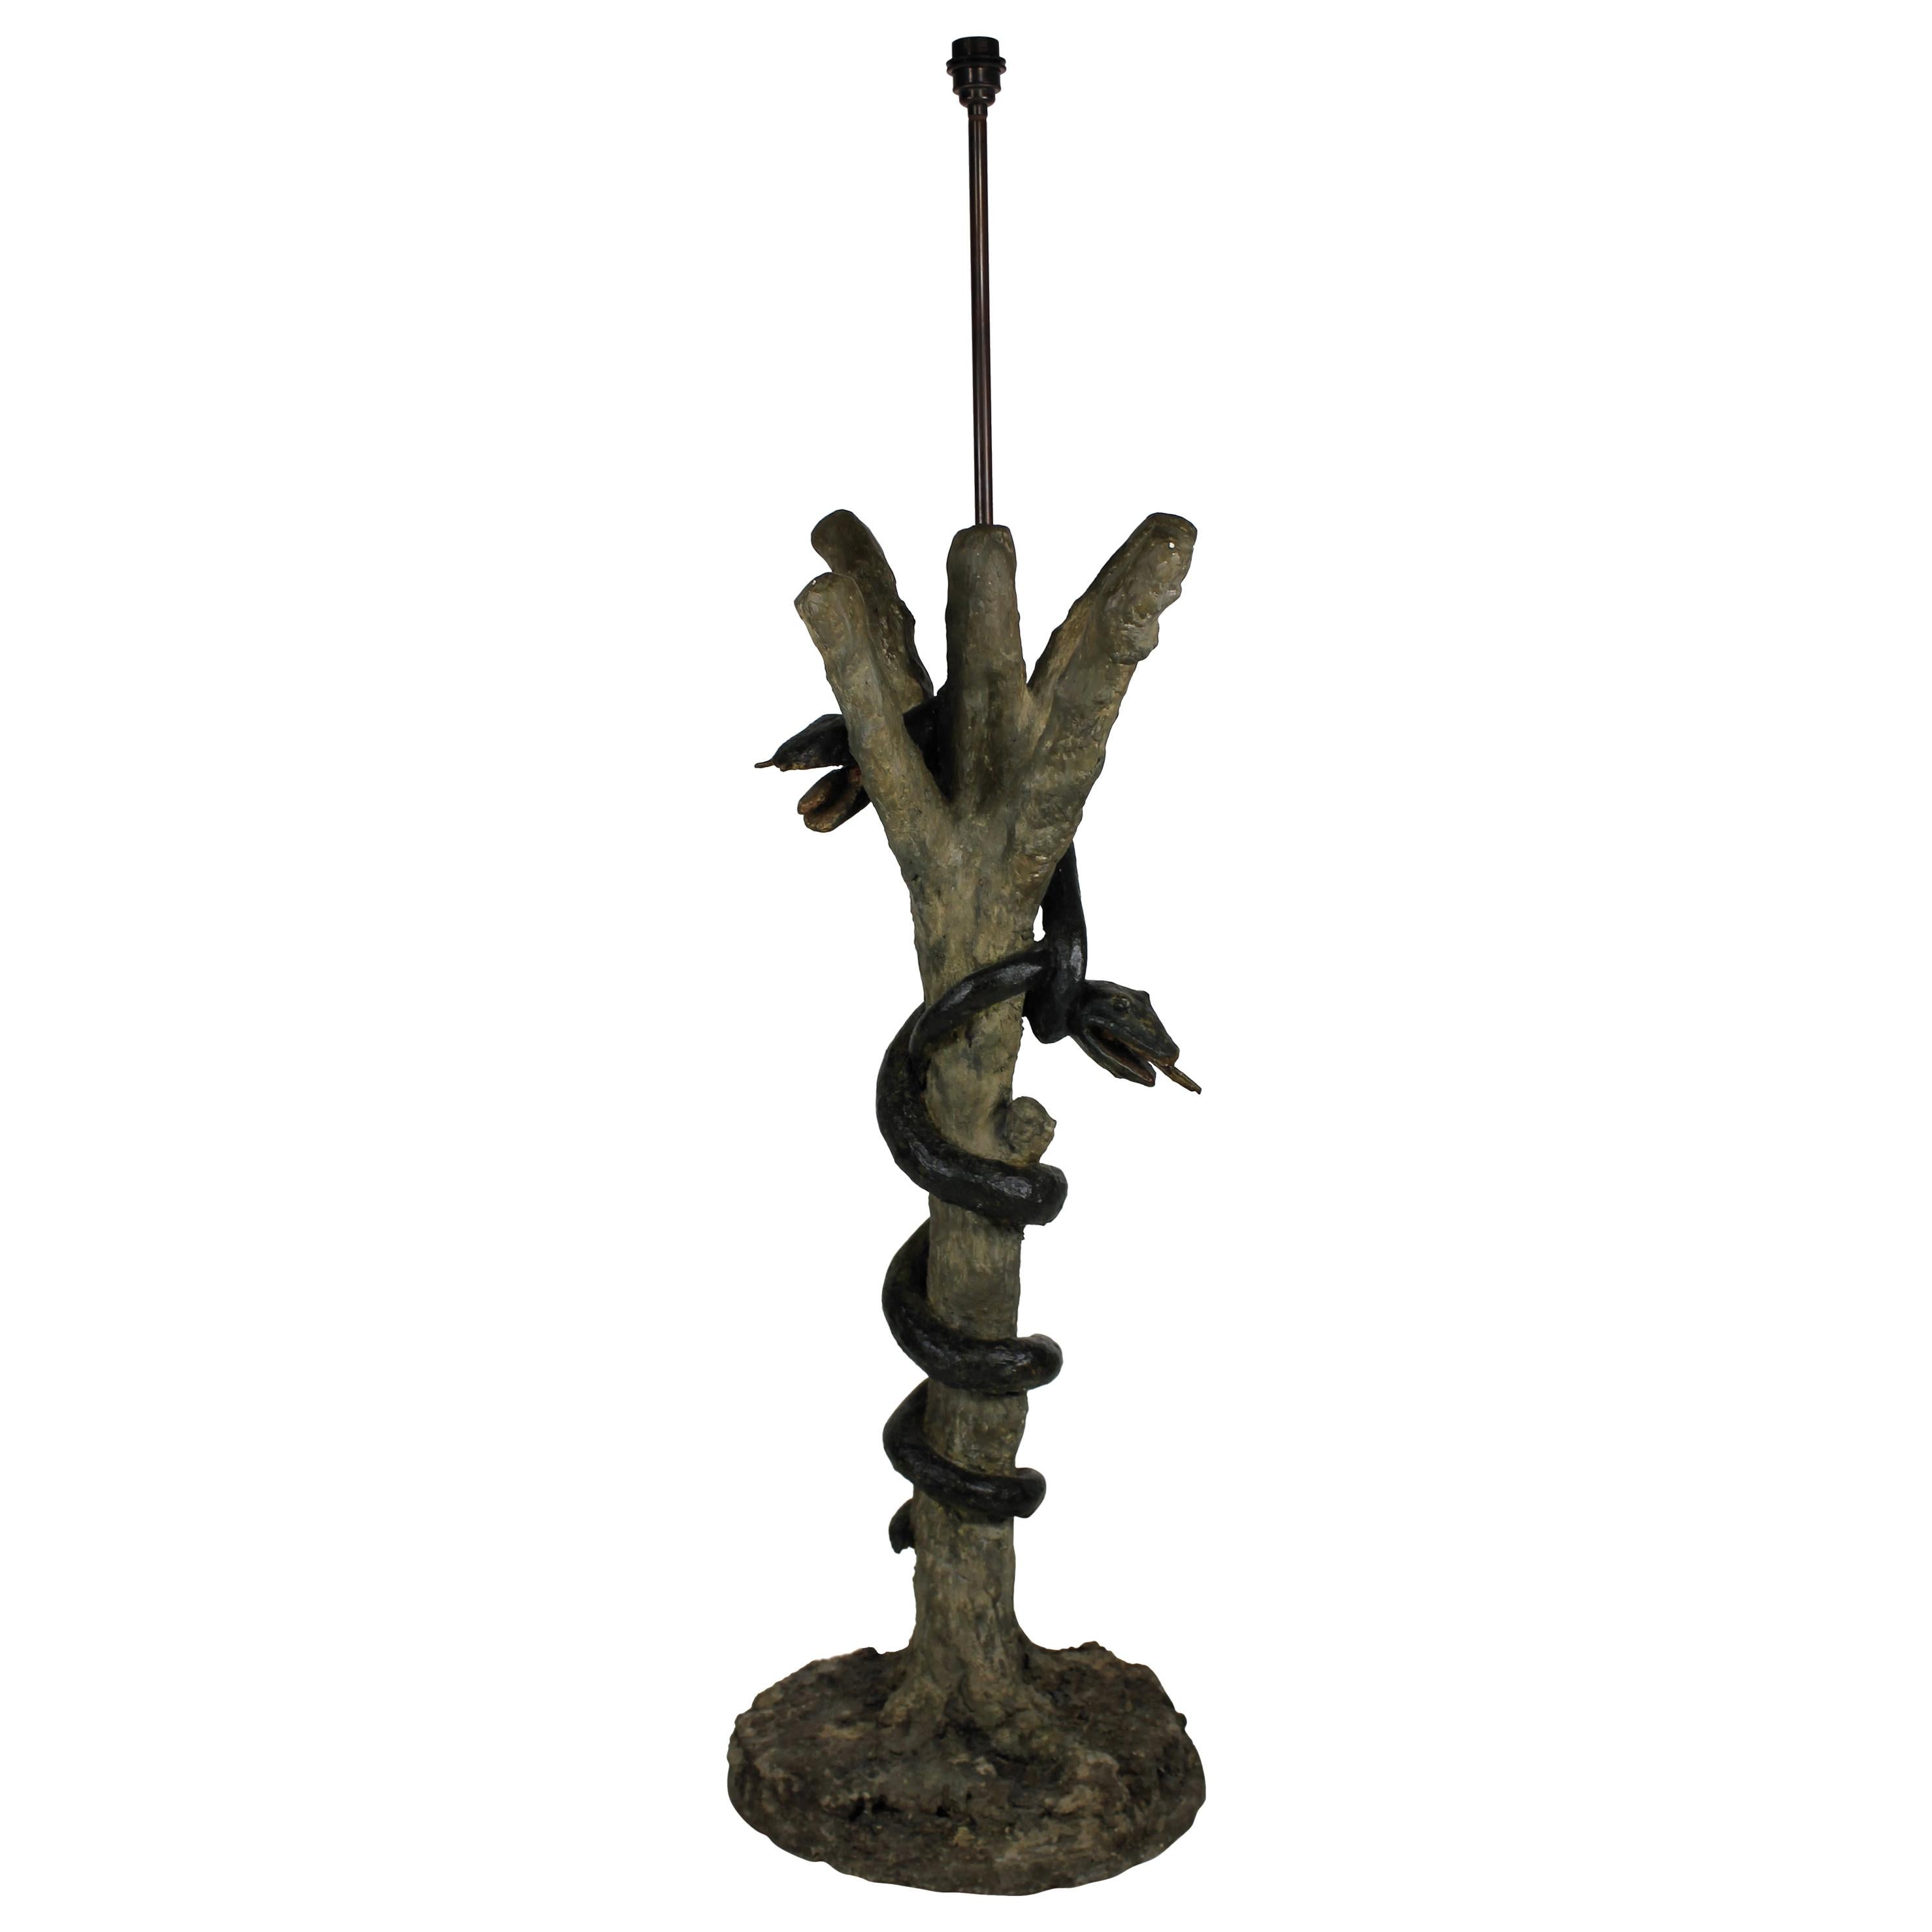 A very unusual model of the Hydra Fountain in Herculaneum as a floor lamp.